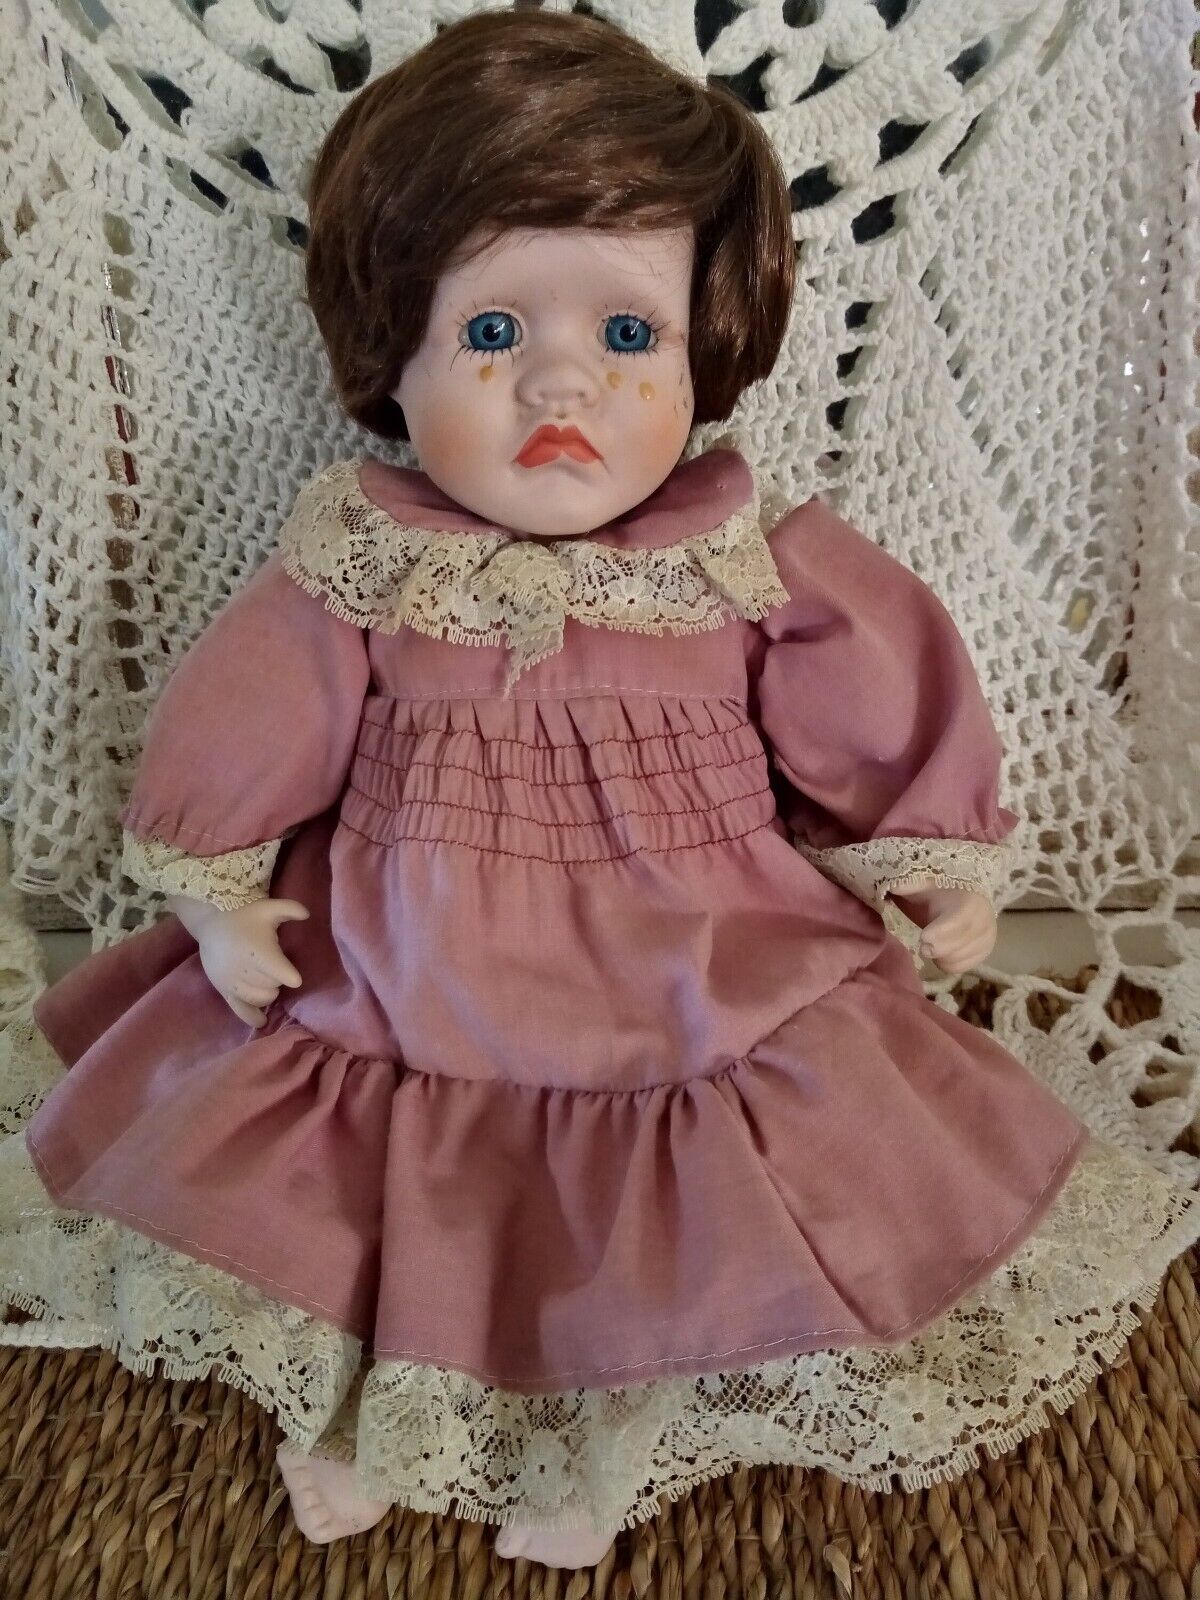 Vintage Haunted Conduit Doll, Negative Energy Item, Not A Toy